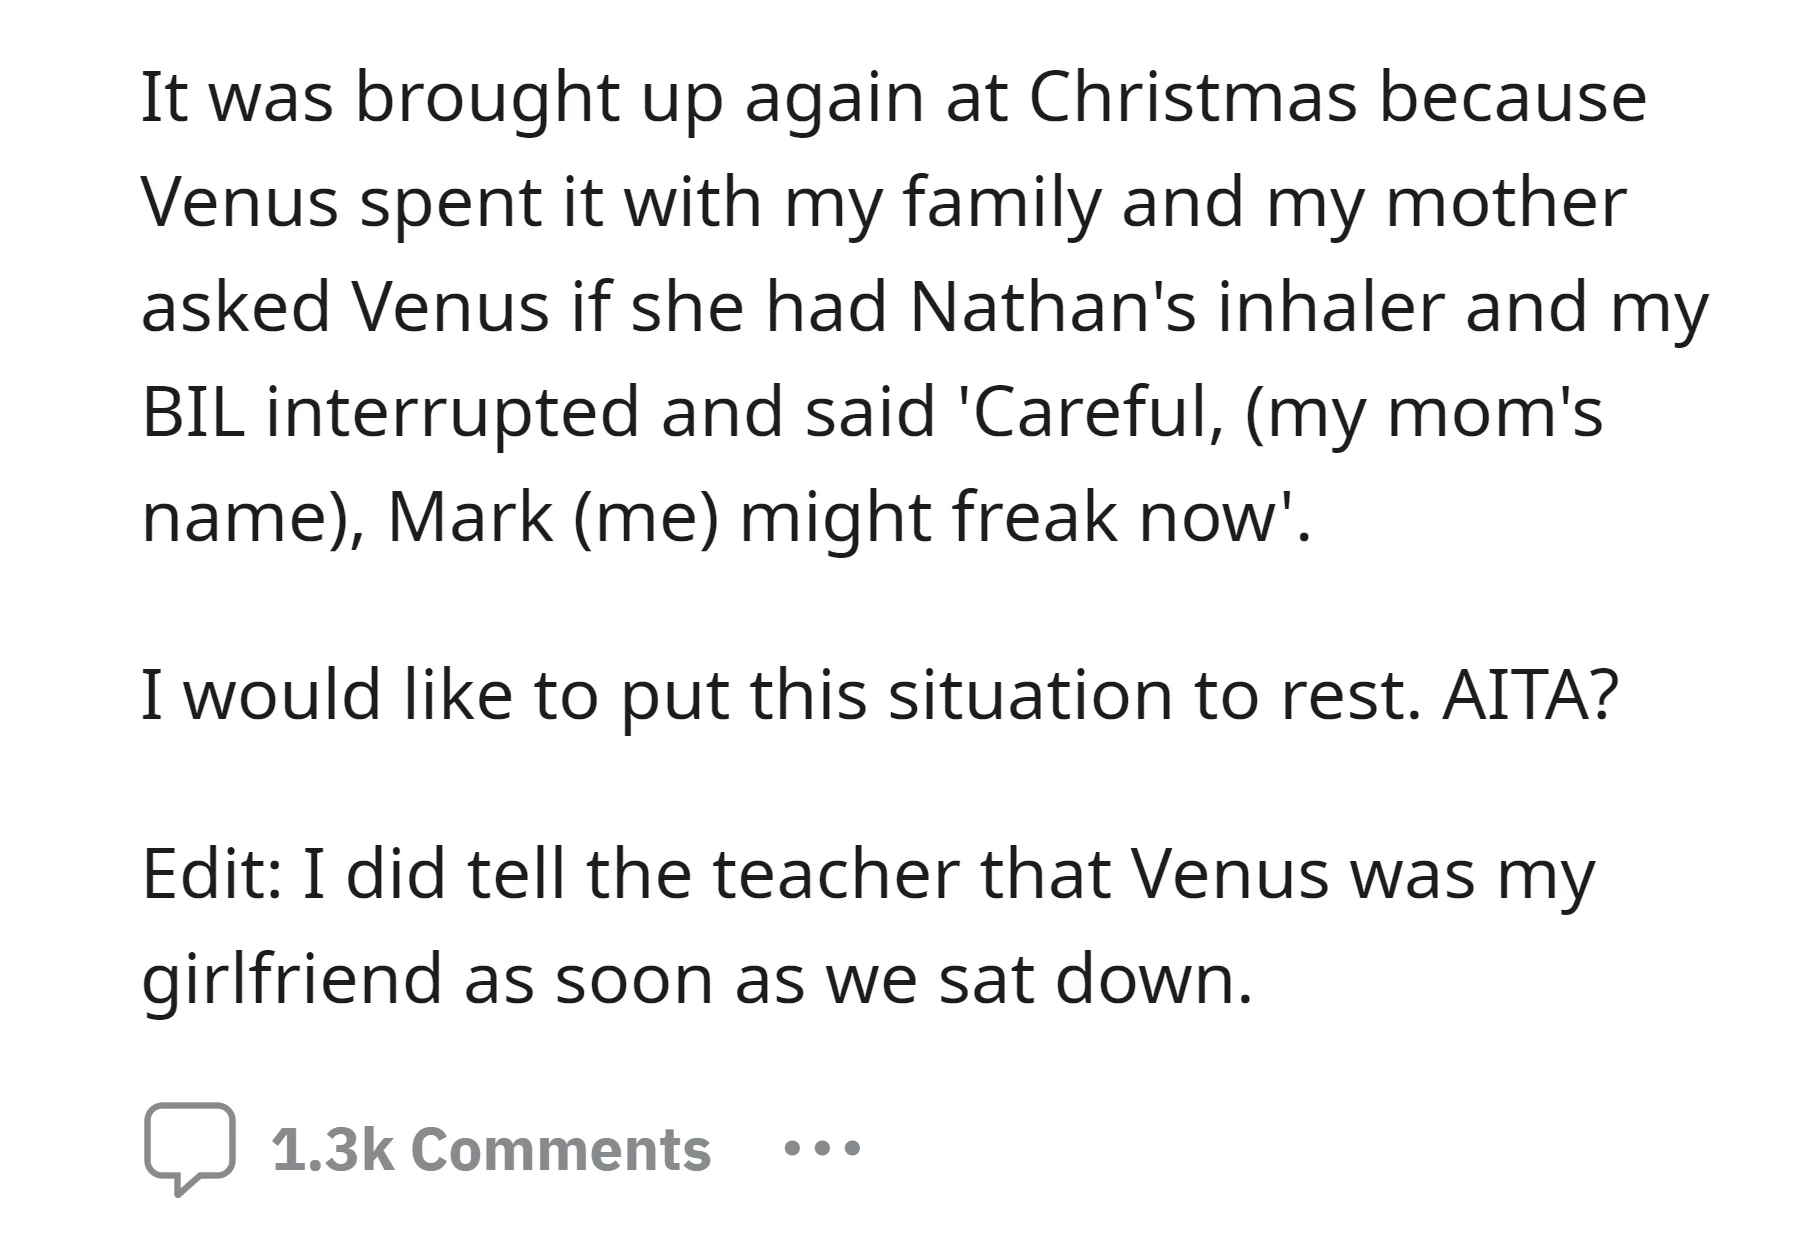 OP faces criticism from the brother-in-law during Christmas for his reaction to the teacher's behavior